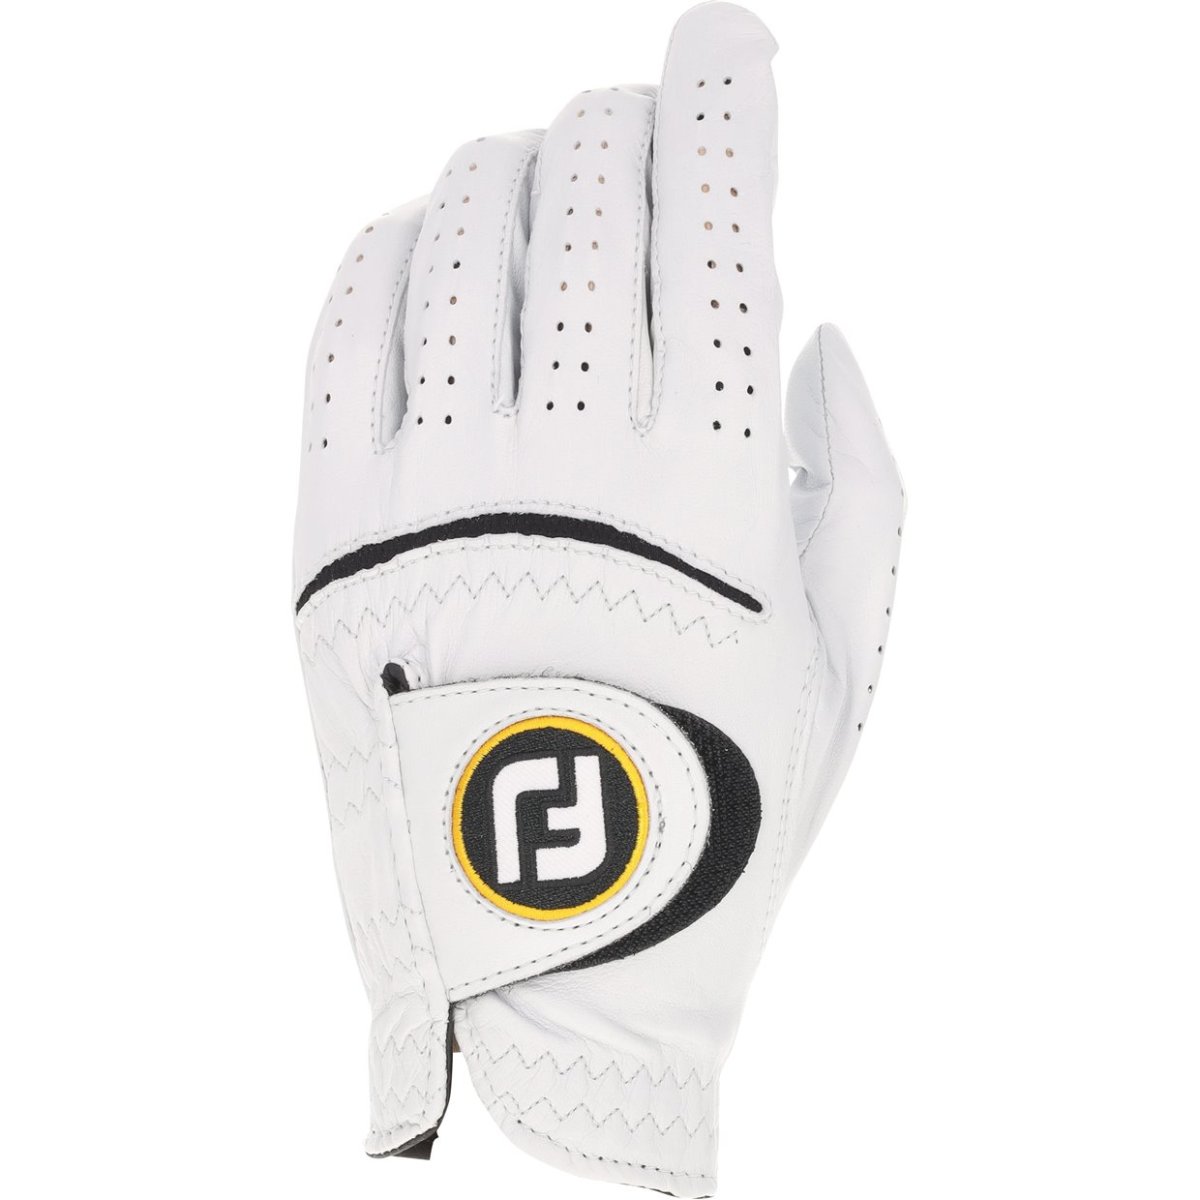 Shop the latest FootJoy golf gloves on Morning Read's online pro shop, powered by GlobalGolf.